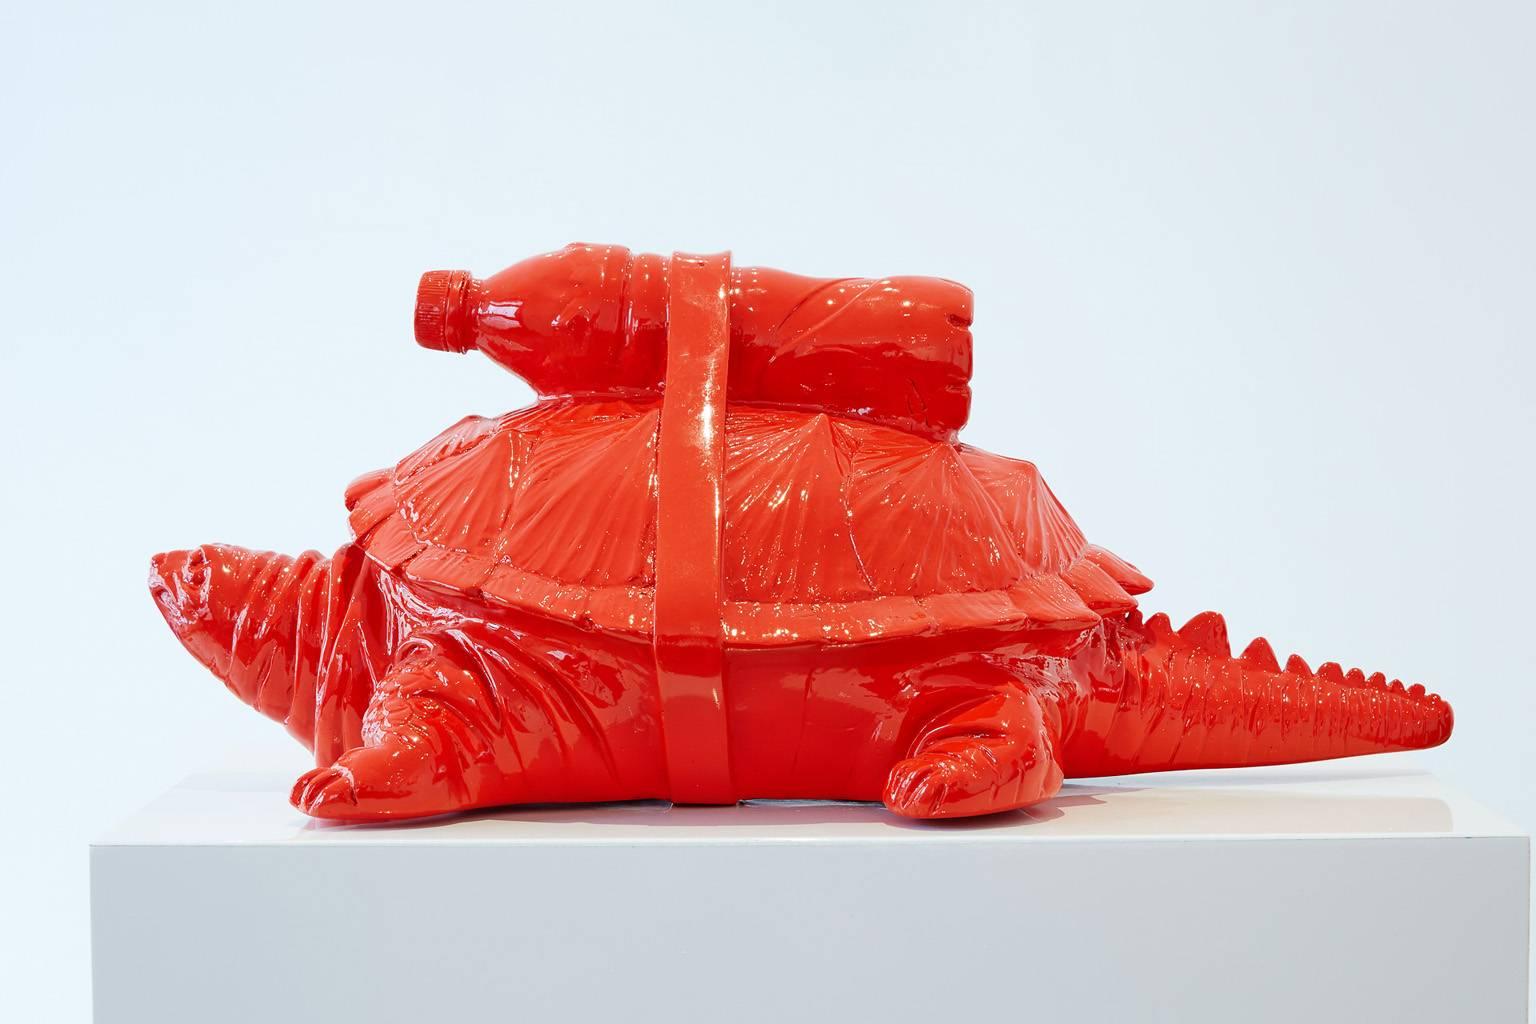 Cloned Turtle with pet bottle. - Sculpture by William Sweetlove